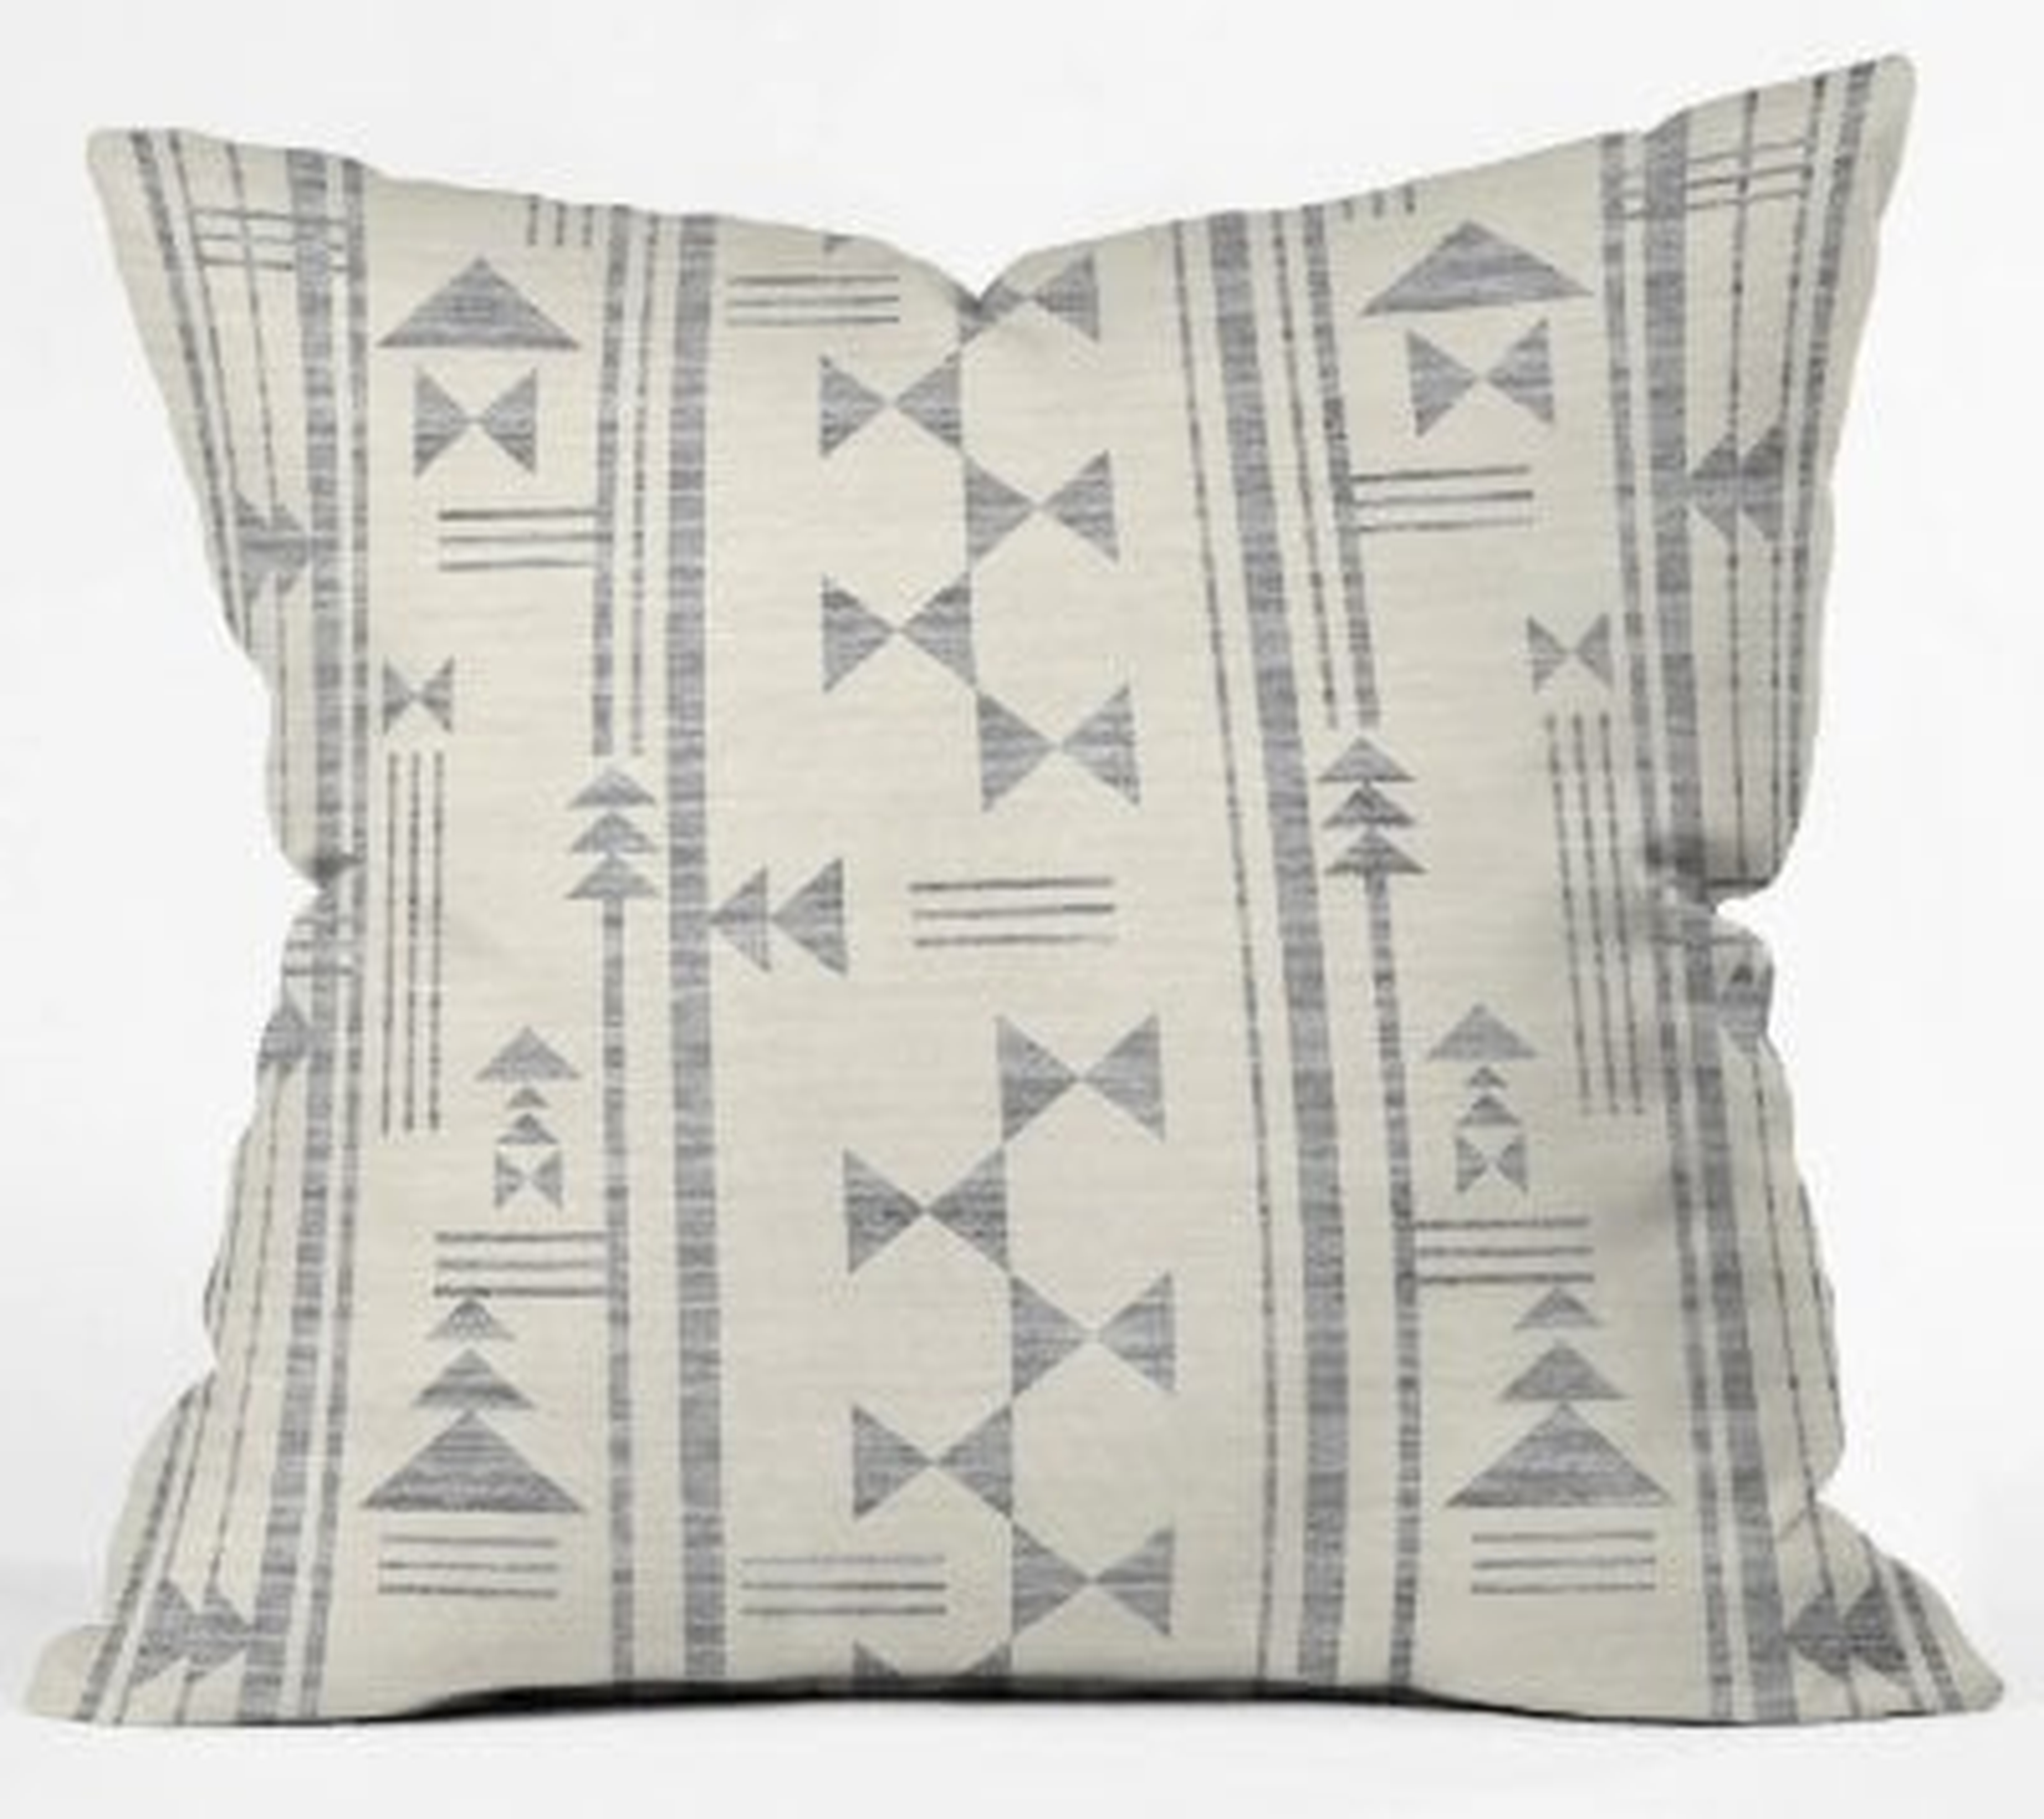 INDIO Throw Pillow - 20" x 20" - Insert Included - Wander Print Co.